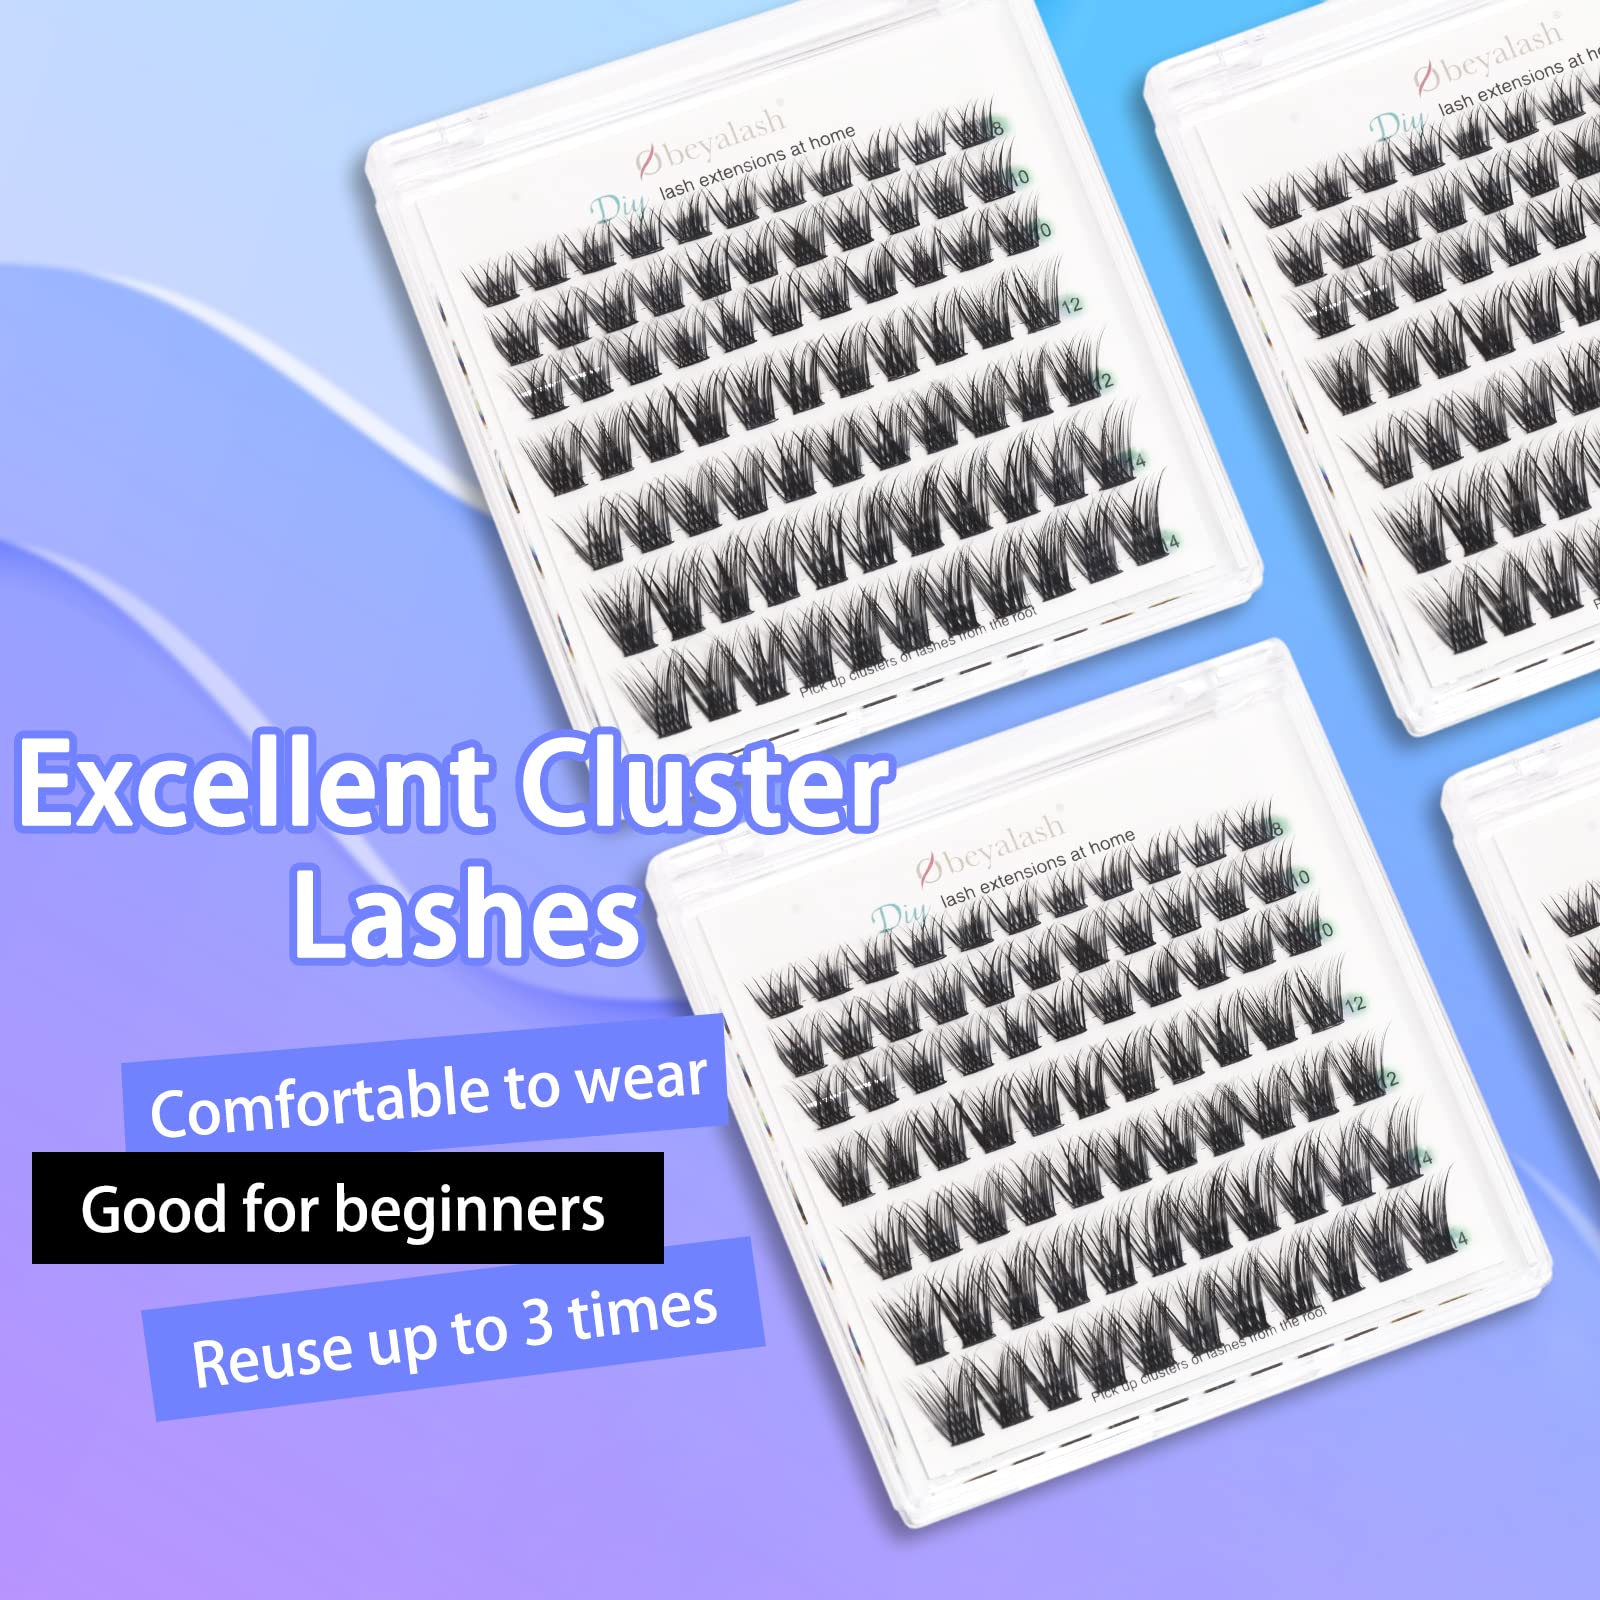 Obeyalash Natural Lash Clusters Wispy Lash Clusters Fluffy Lash Extensions C Curl 8-14mm Lash Clusters Natural Look DIY Eye Individual Lash Fox Eye False Lashes for Beginners At Home Soft Thin Band